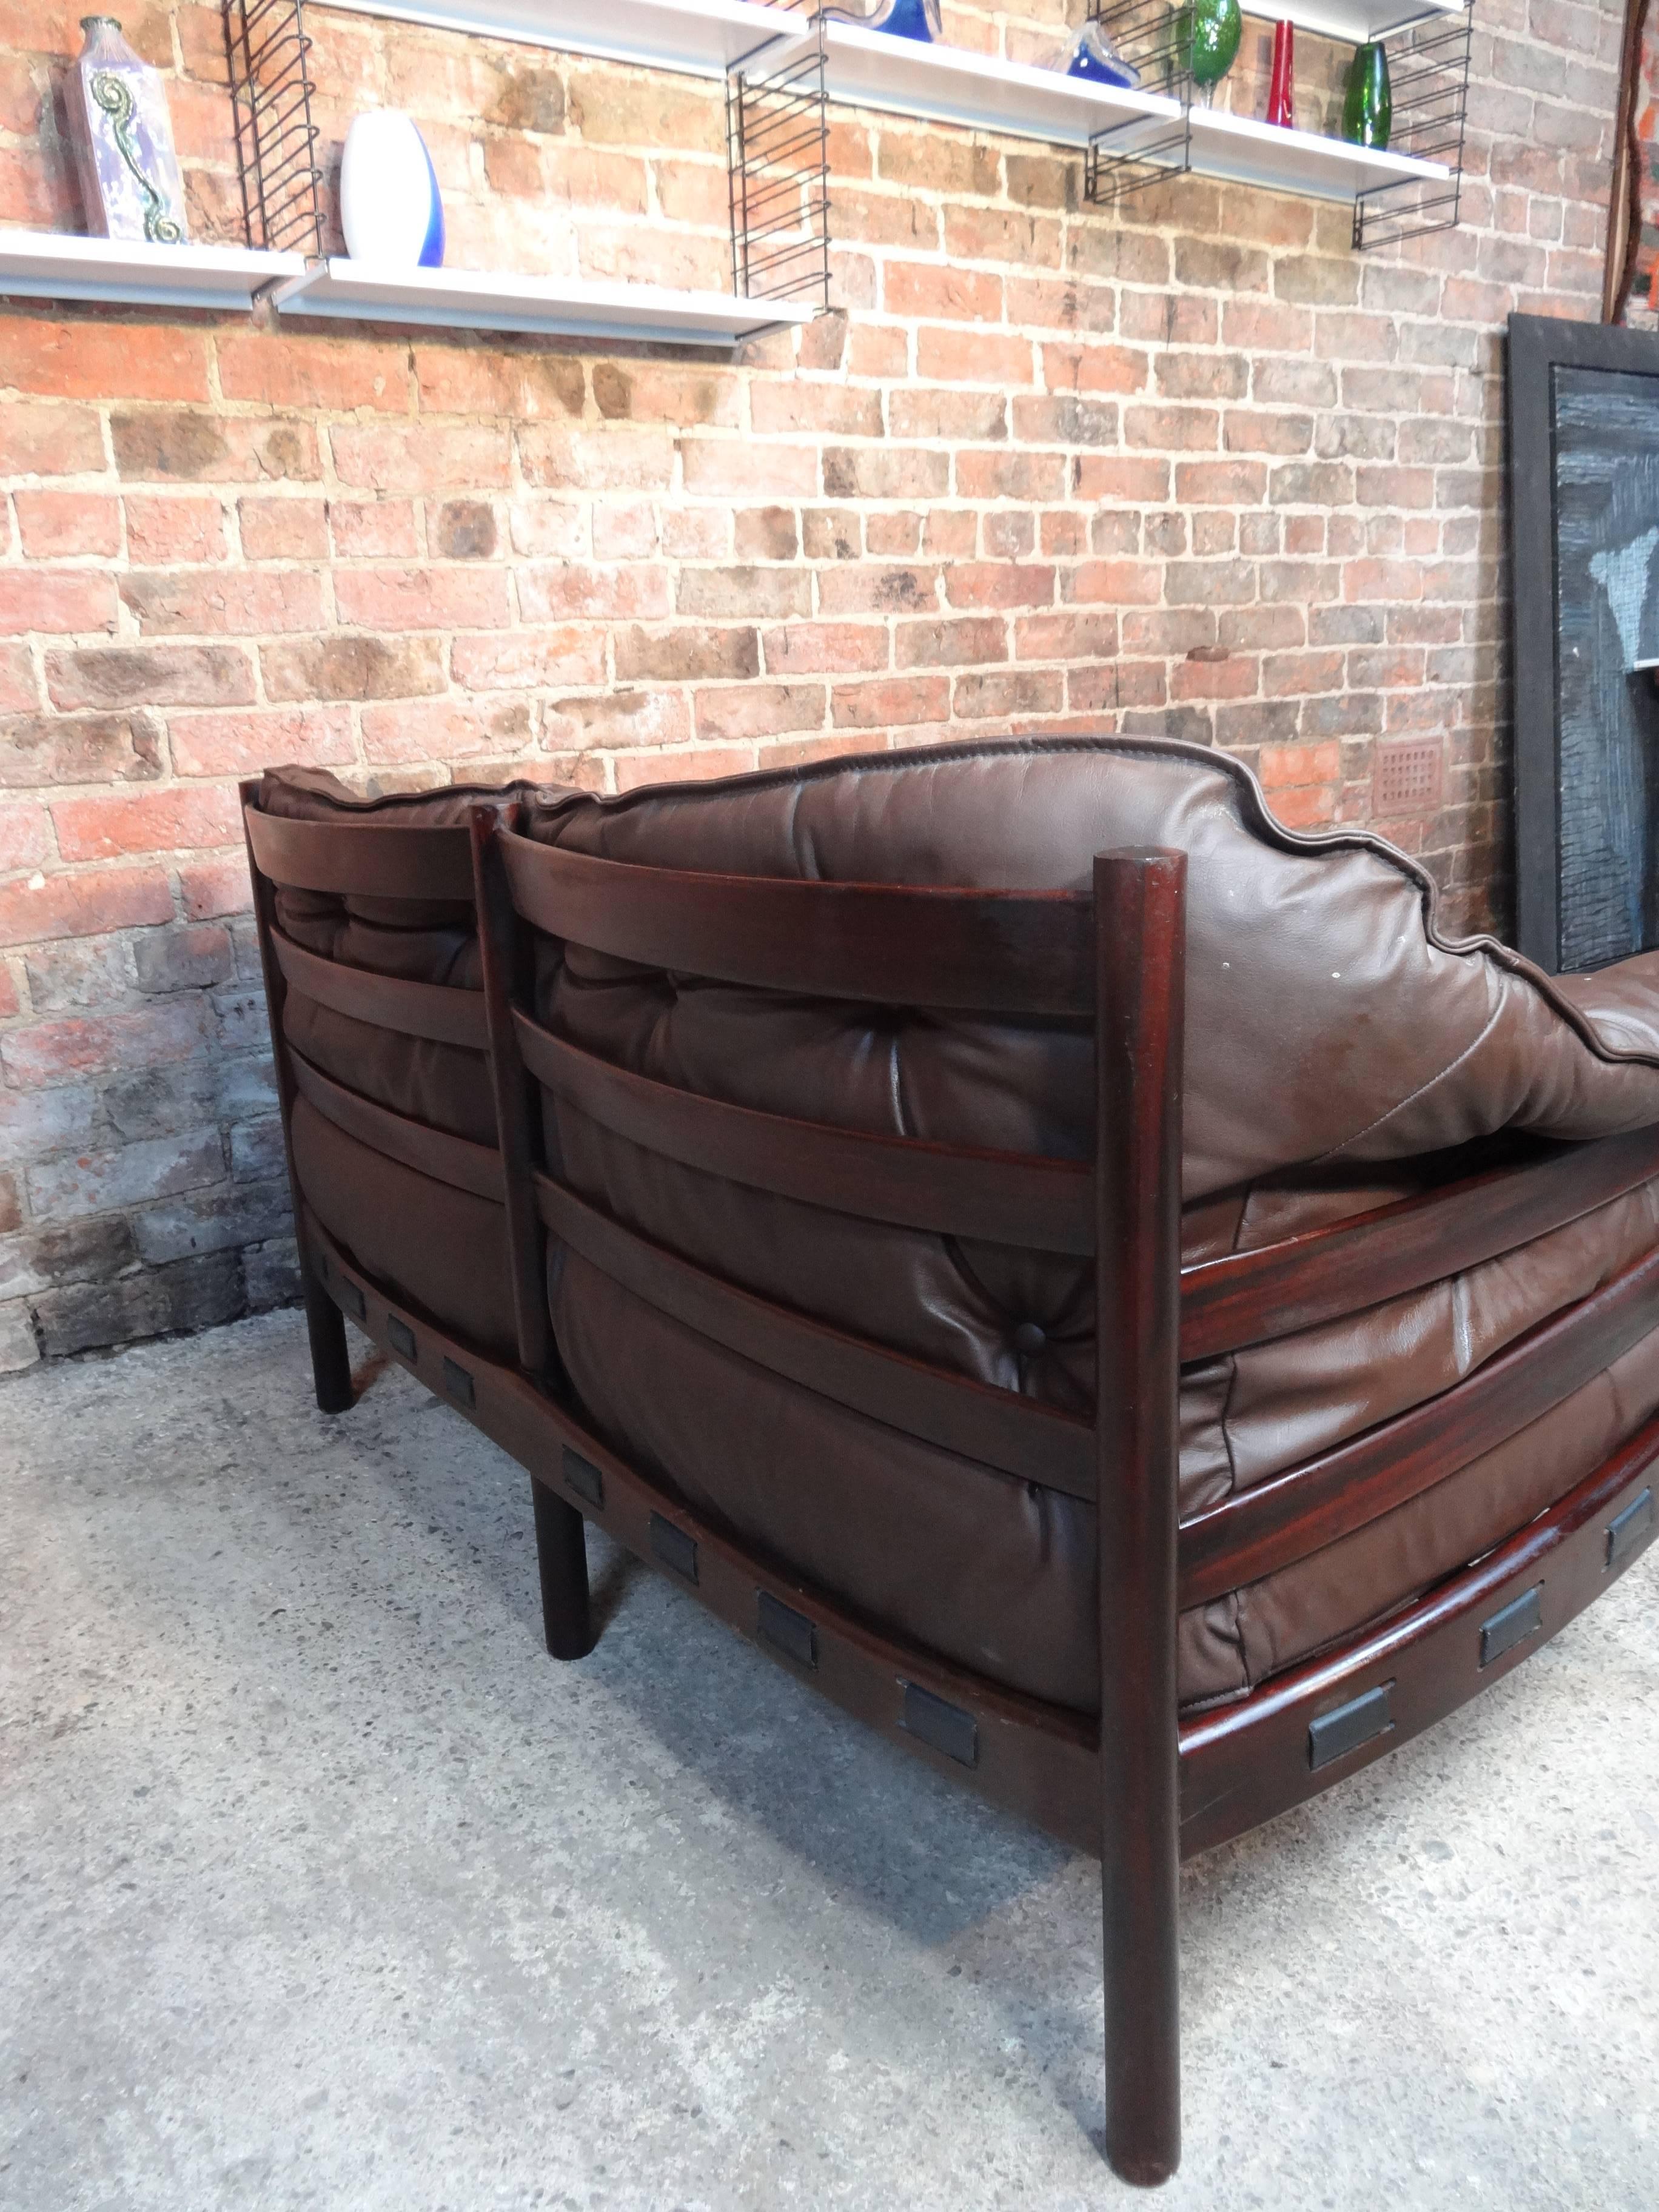 Great Arne Norell brown leather sofa is in very good vintage condition, leather is in very good condition as well, this Classic Danish sofa are the antiques of the future and look great in any decor.

Measures: Seat height 45cm, height 70cm, depth